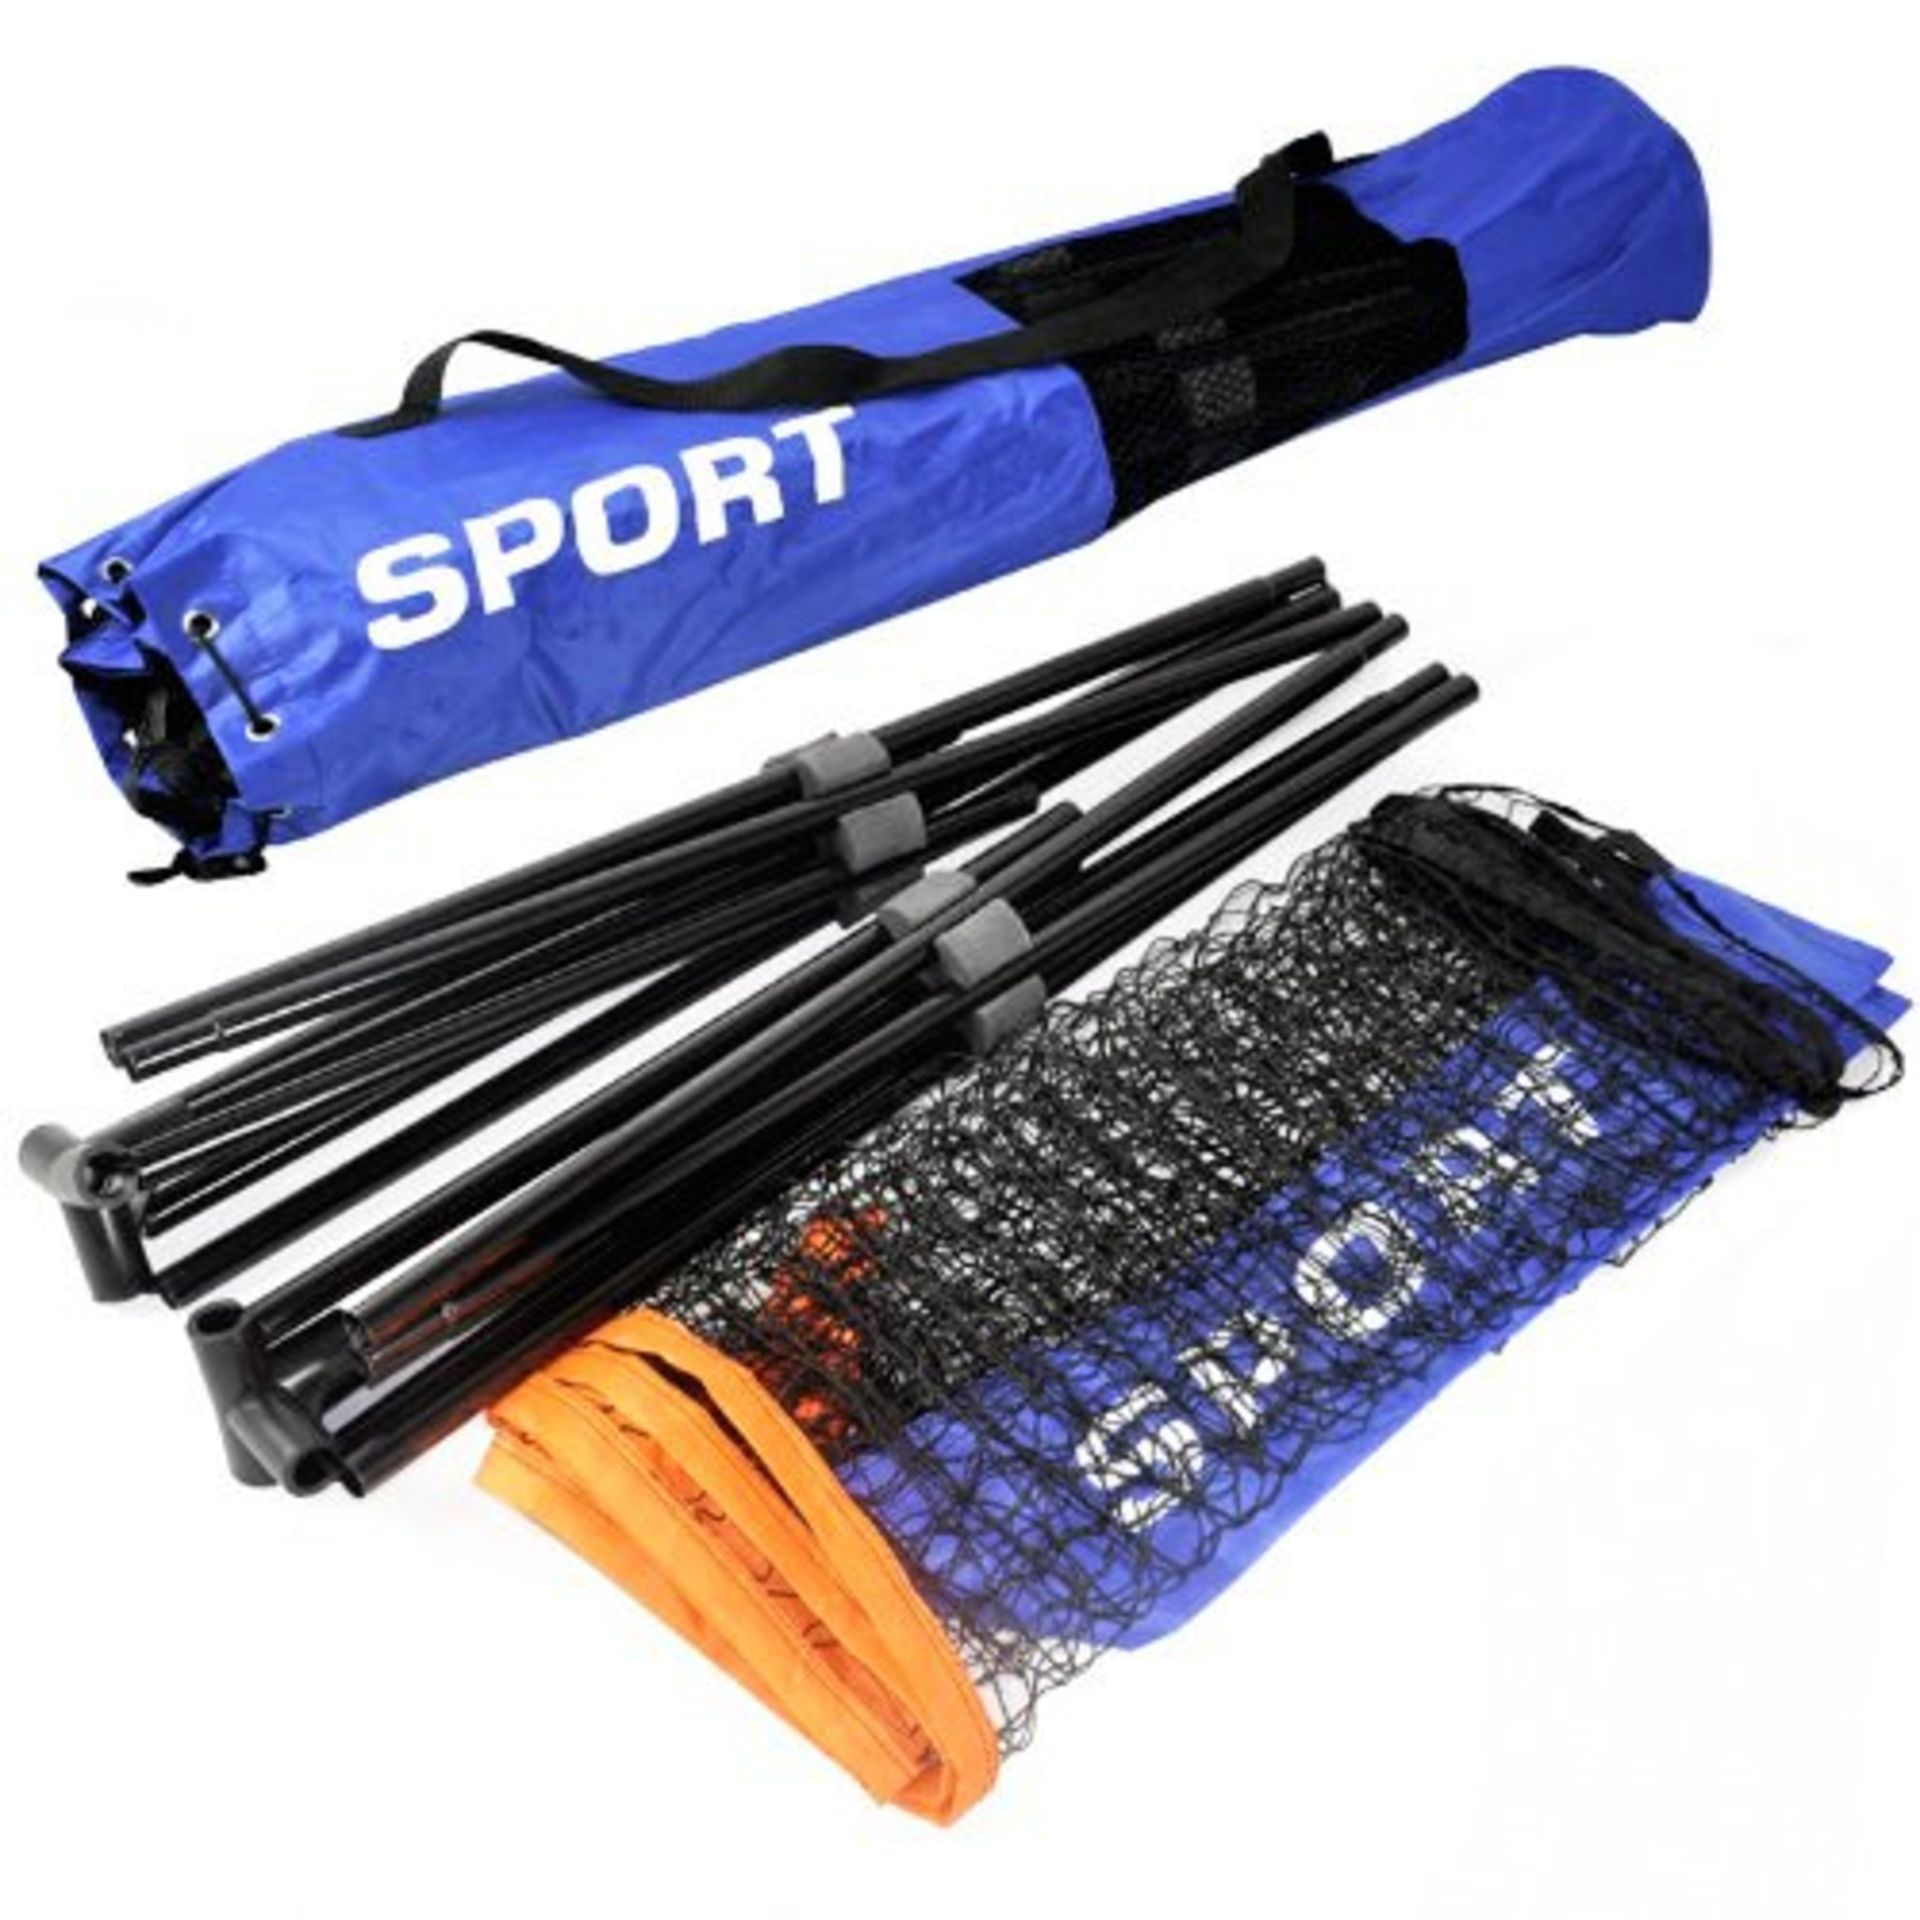 (SK32) Large Multi-Purpose fully adjustable net set. The posts are able to reach 155cm for badm... - Image 3 of 3